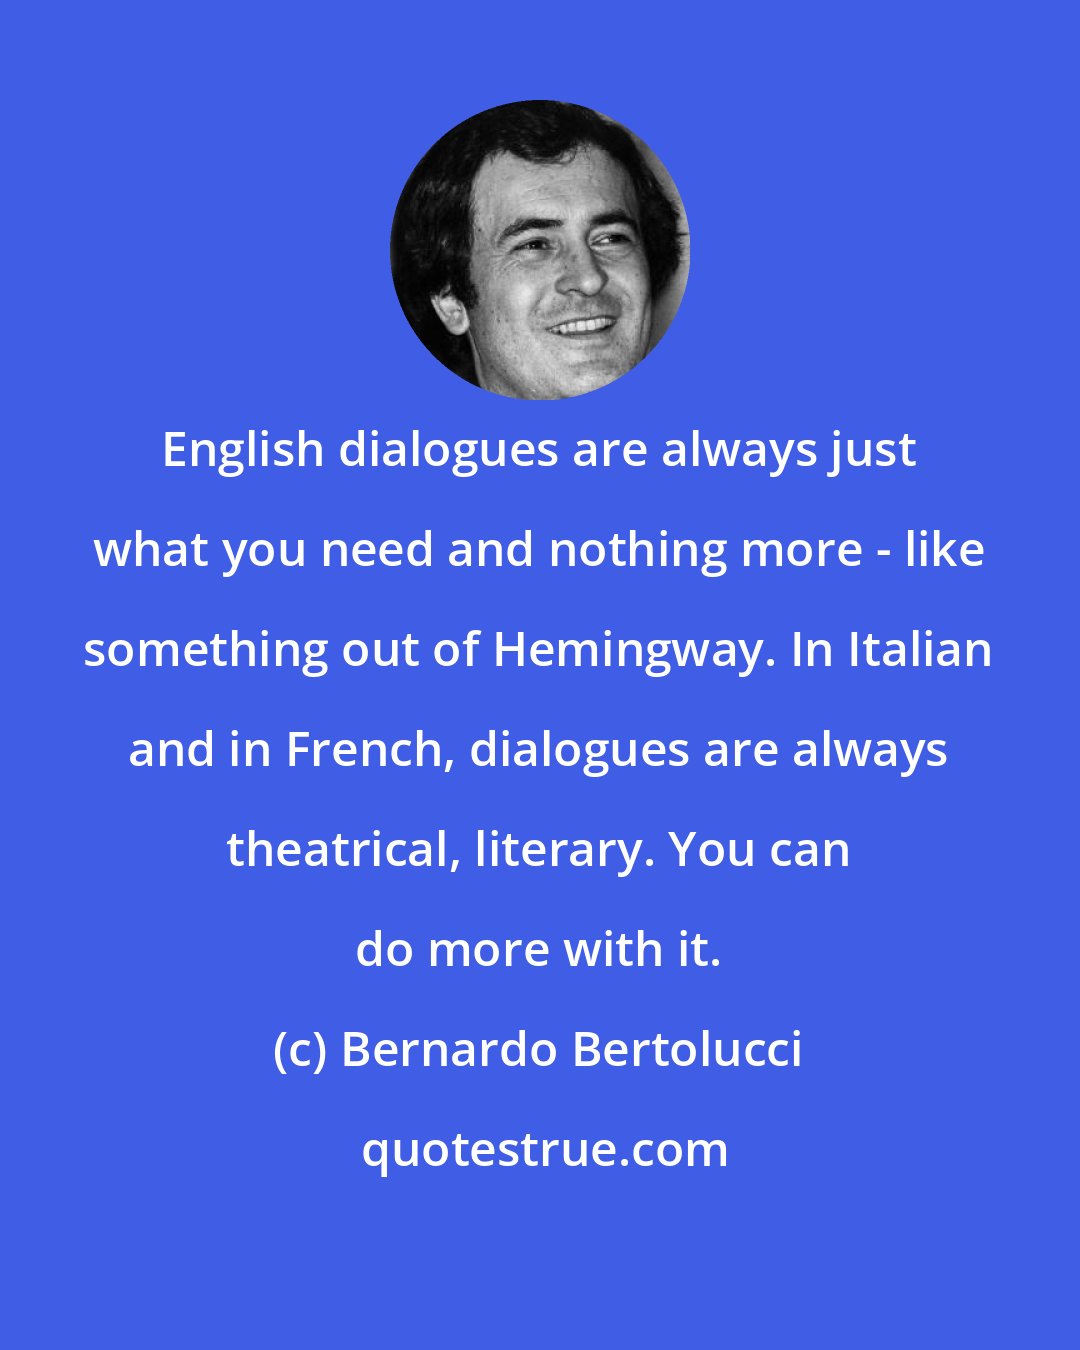 Bernardo Bertolucci: English dialogues are always just what you need and nothing more - like something out of Hemingway. In Italian and in French, dialogues are always theatrical, literary. You can do more with it.